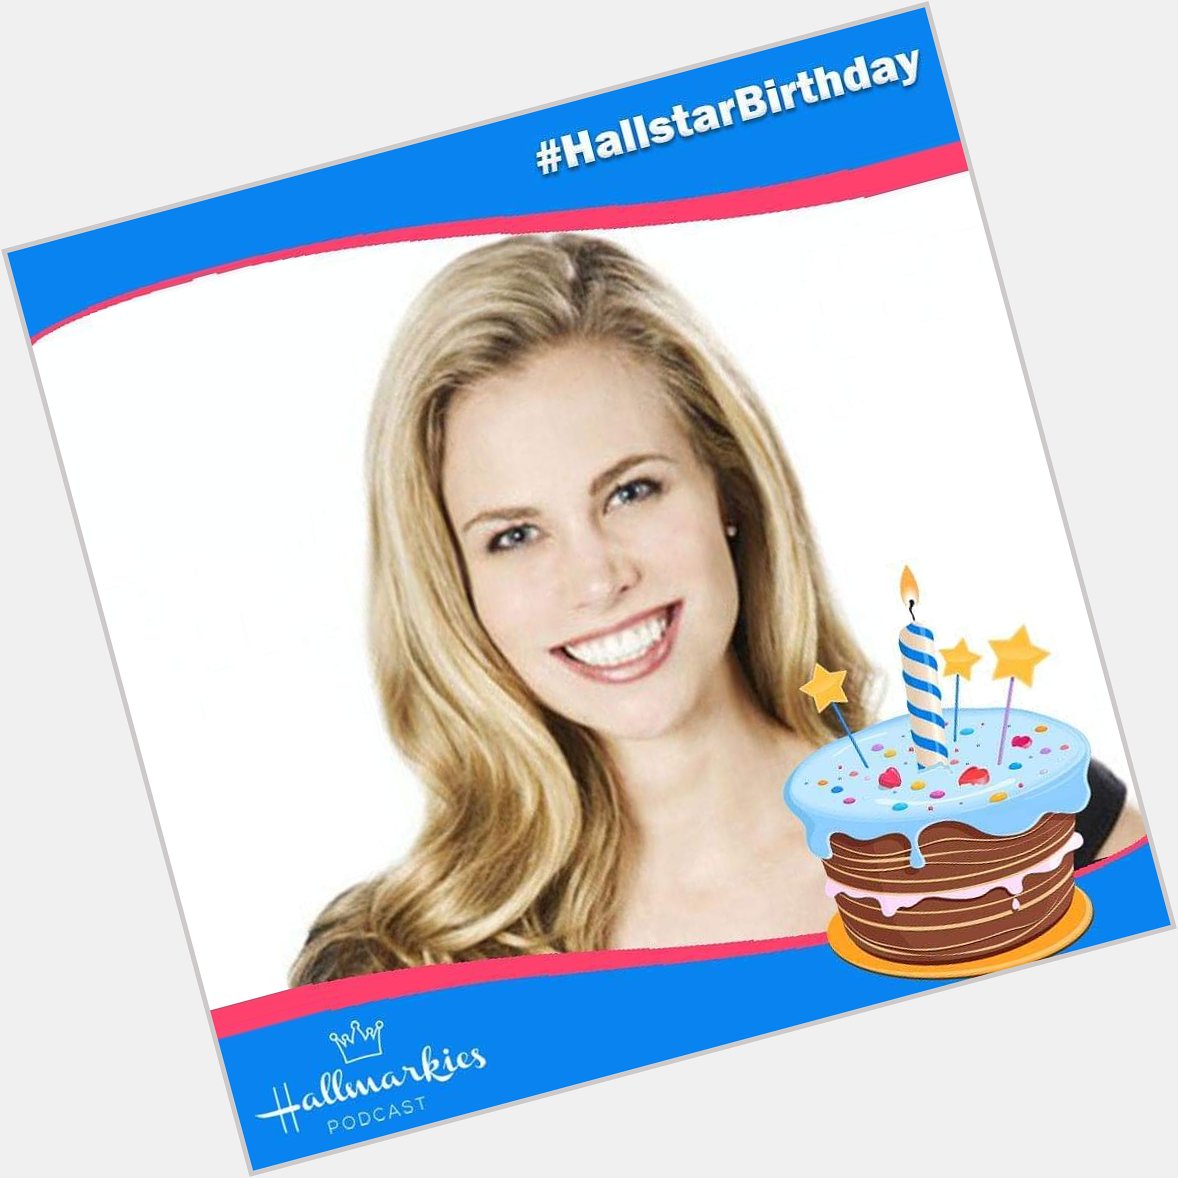 Happy Birthday to the lovely Brooke Burns   